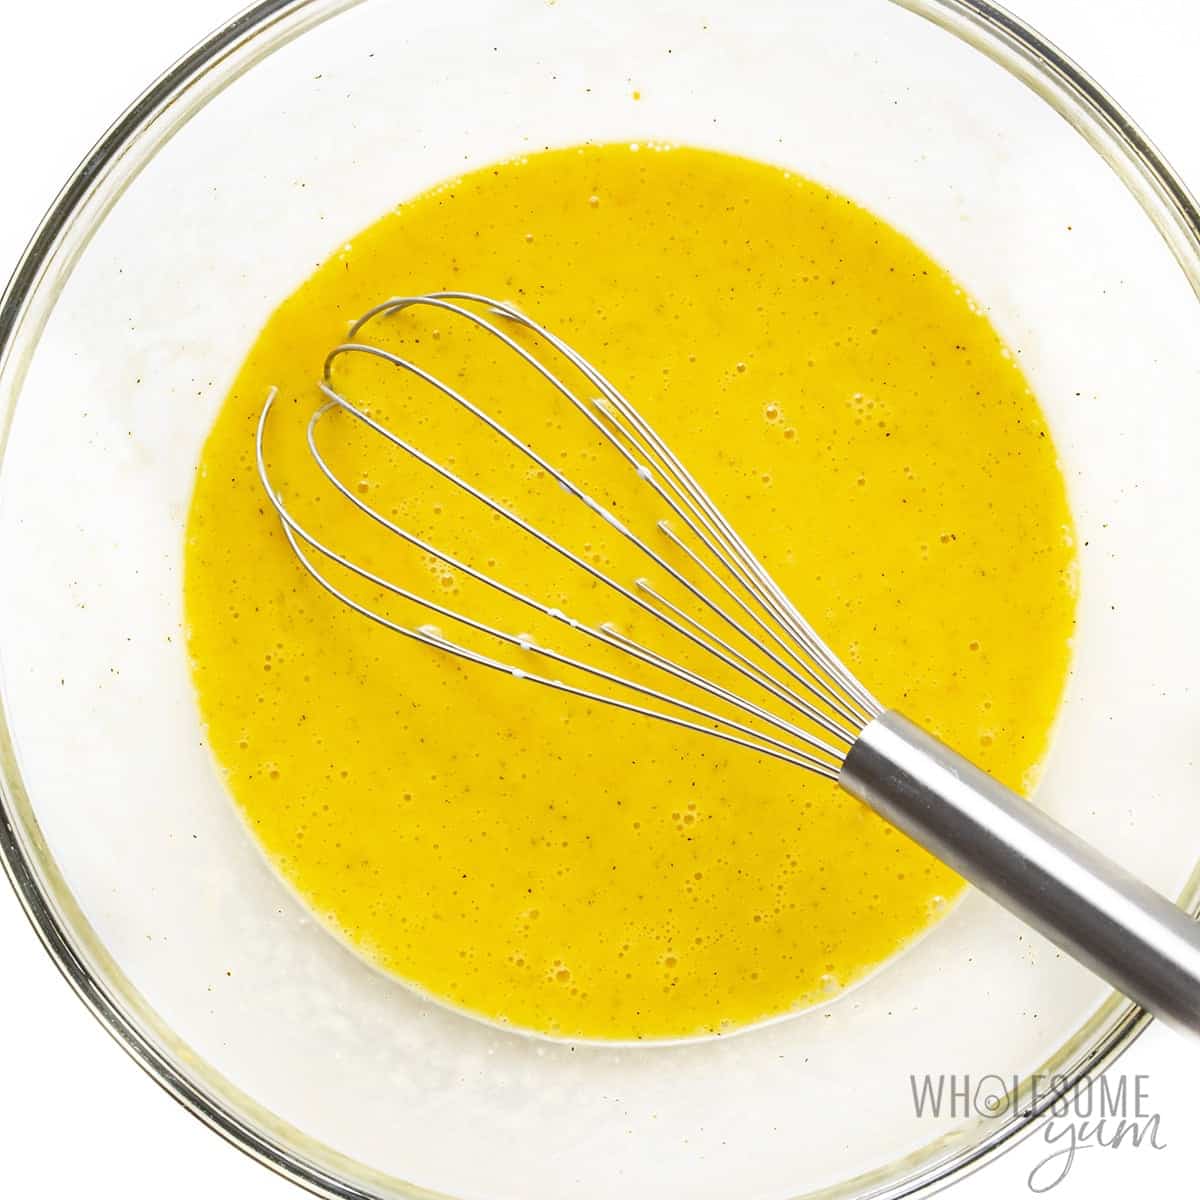 Whisked eggs in a bowl.